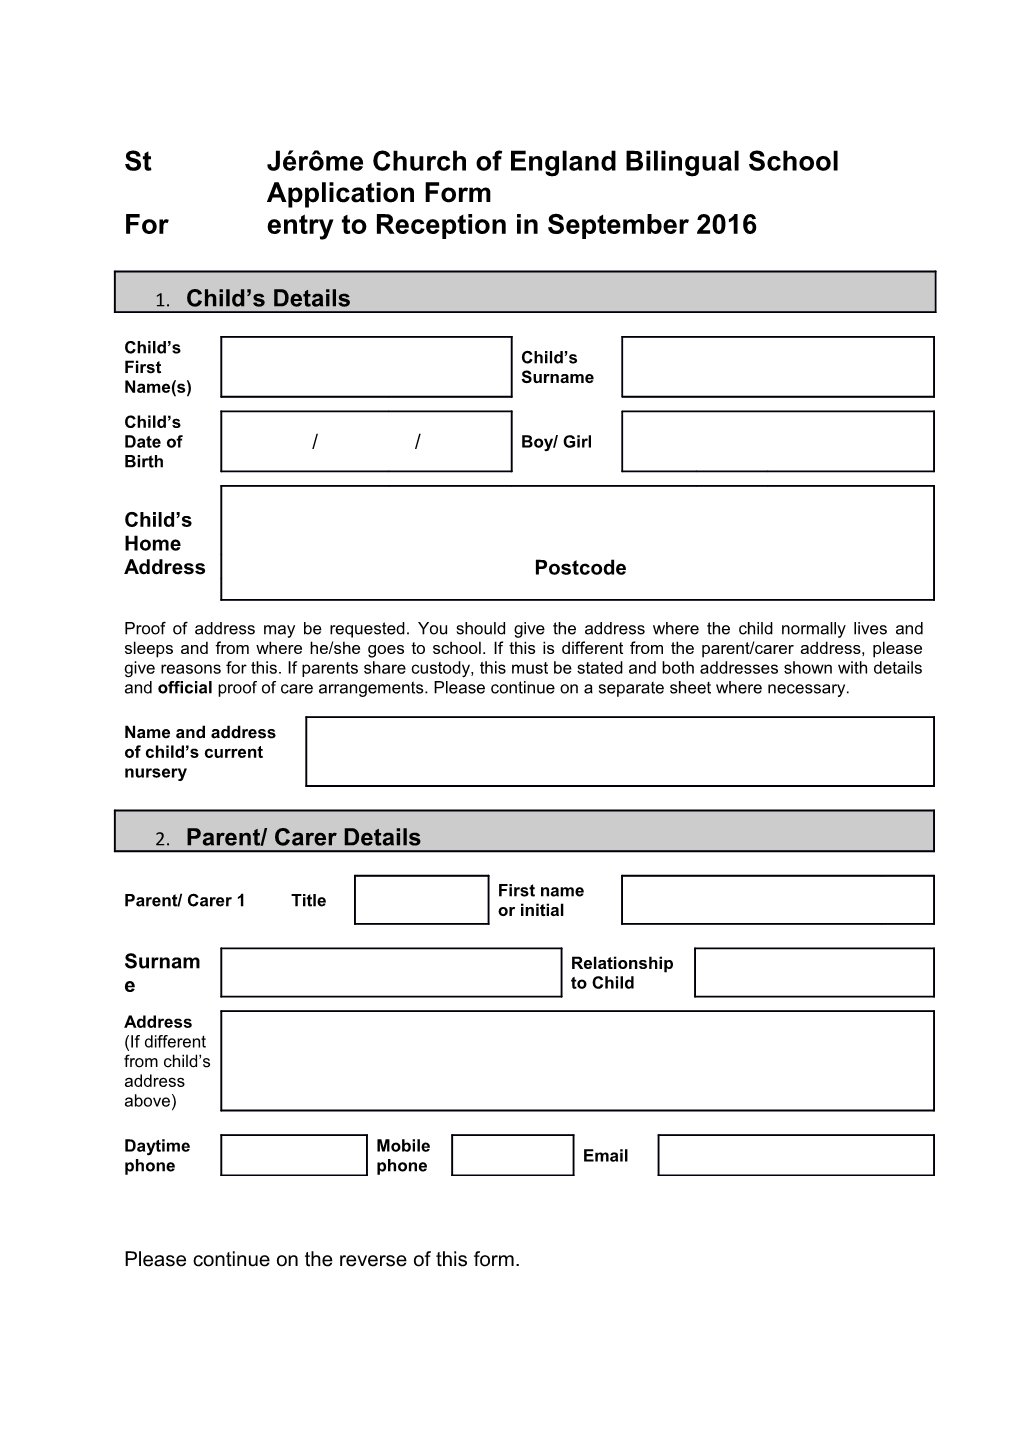 Please Continue on the Reverse of This Form